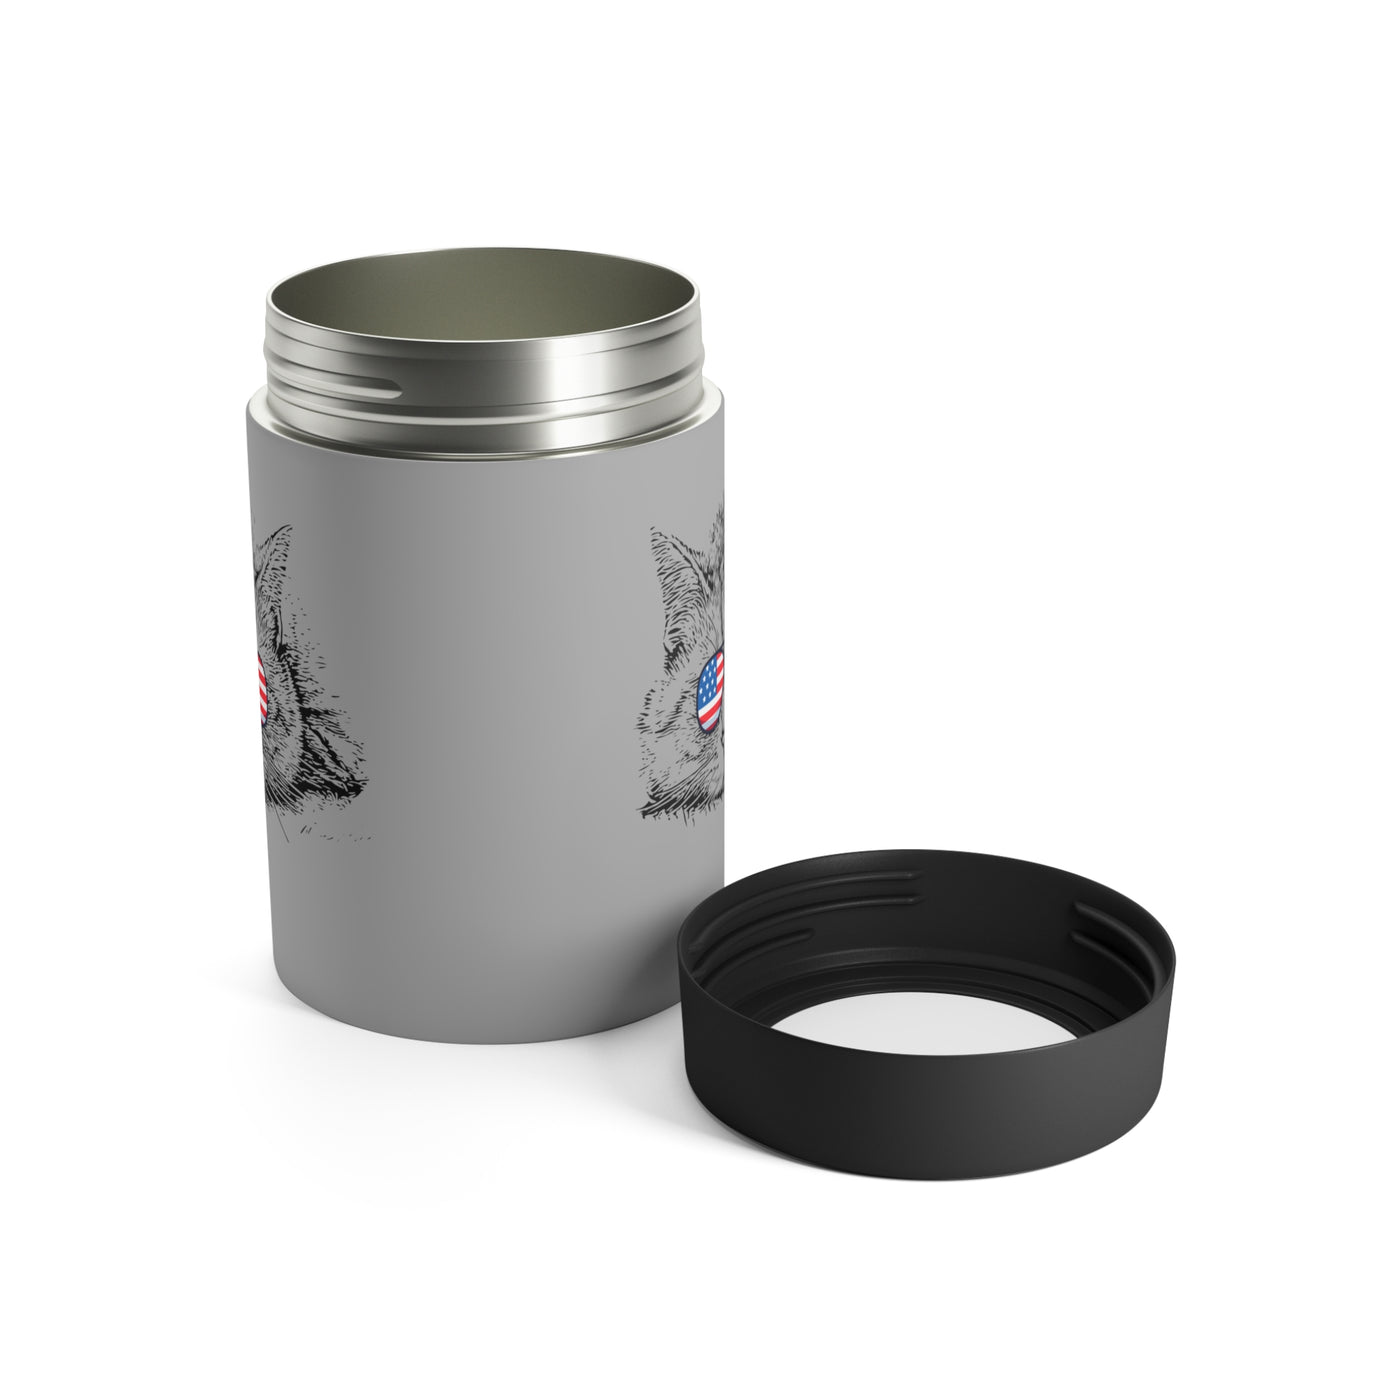 Independence Day Cat Stainless Steel Can Holder